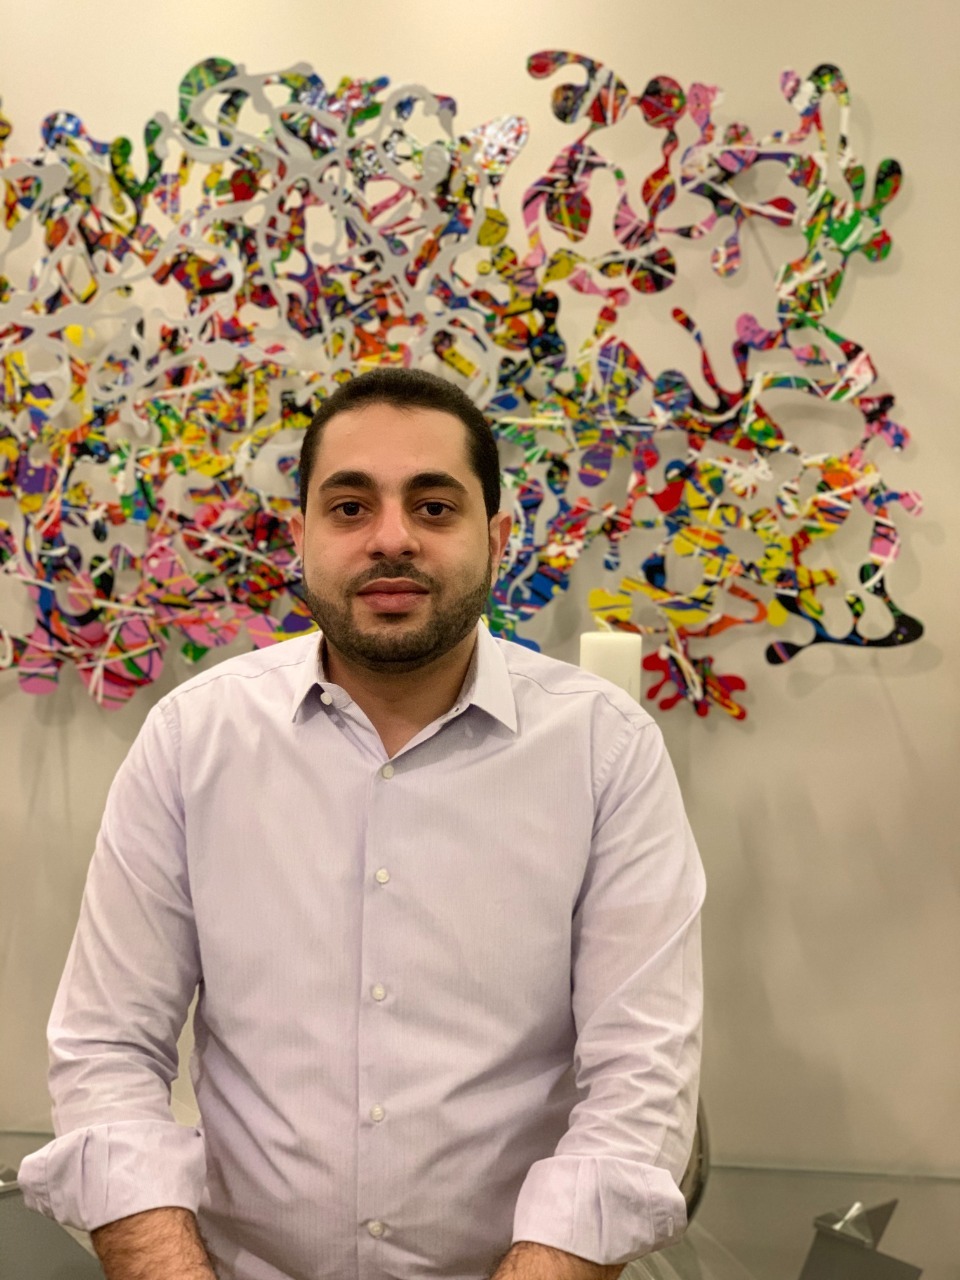 Omar Al-Khawaja is one of the leading professional investors in information technology and digitization